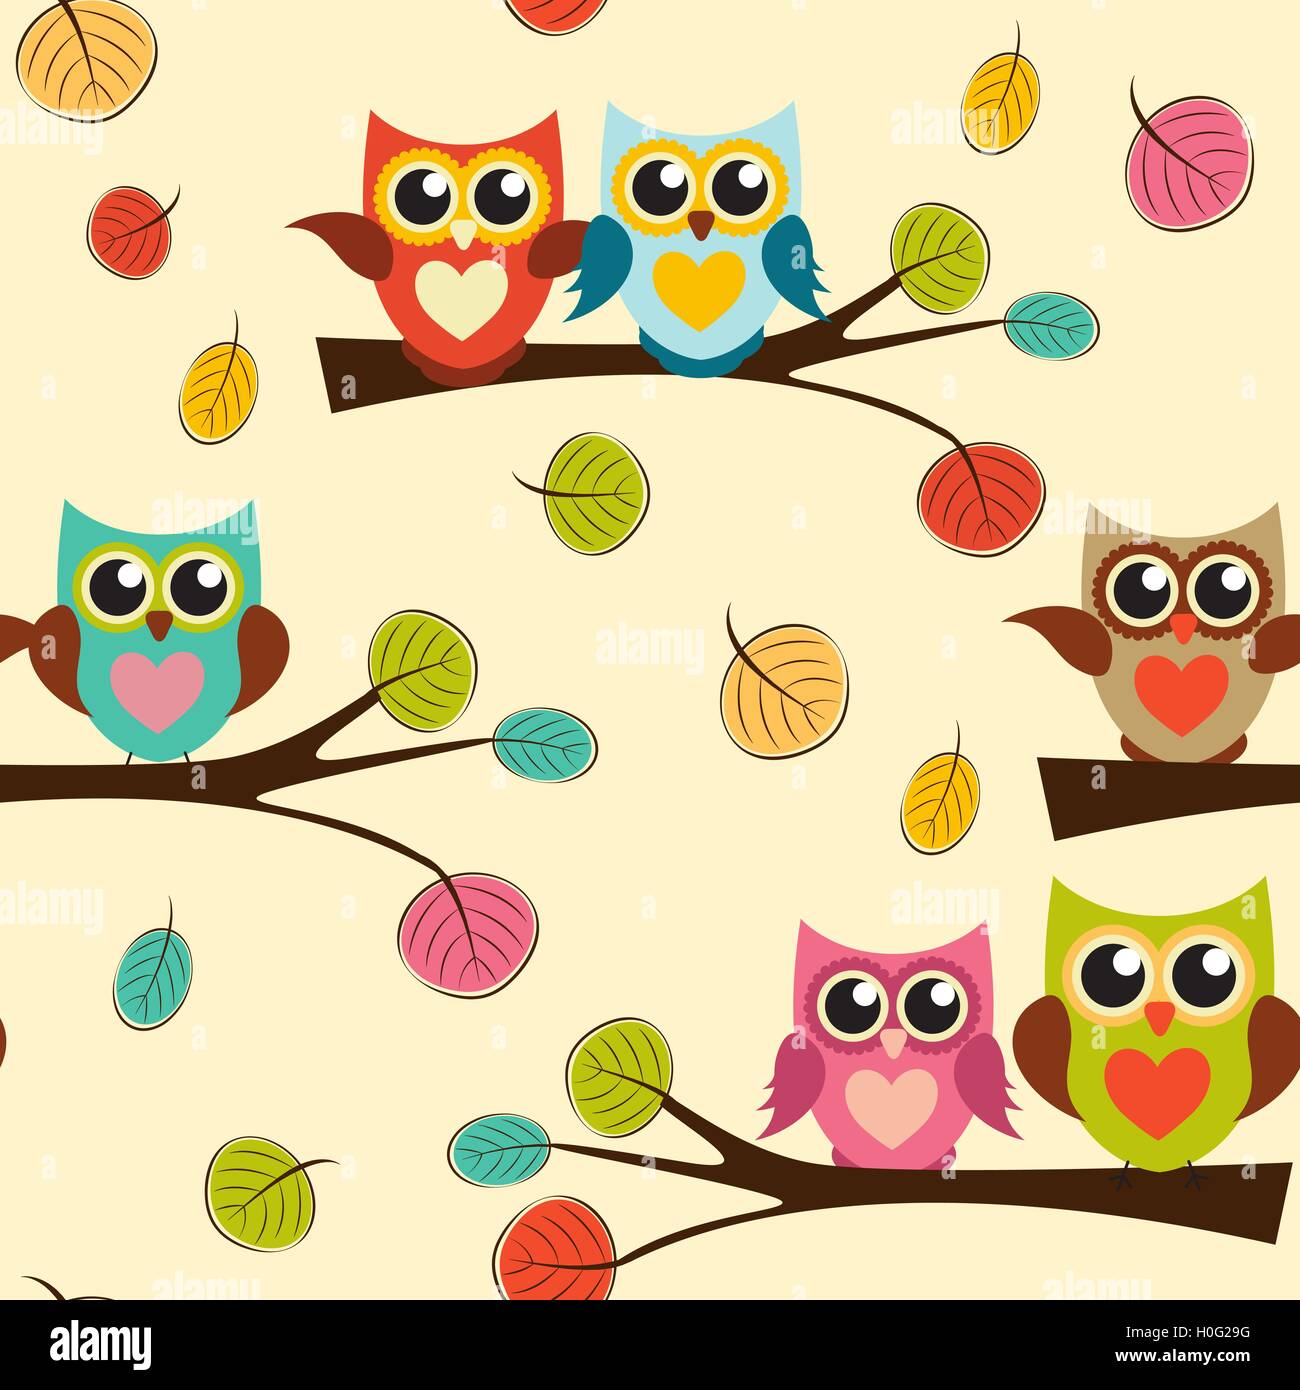 Cute Owl Seamless Pattern Background Vector Illustration Stock ...